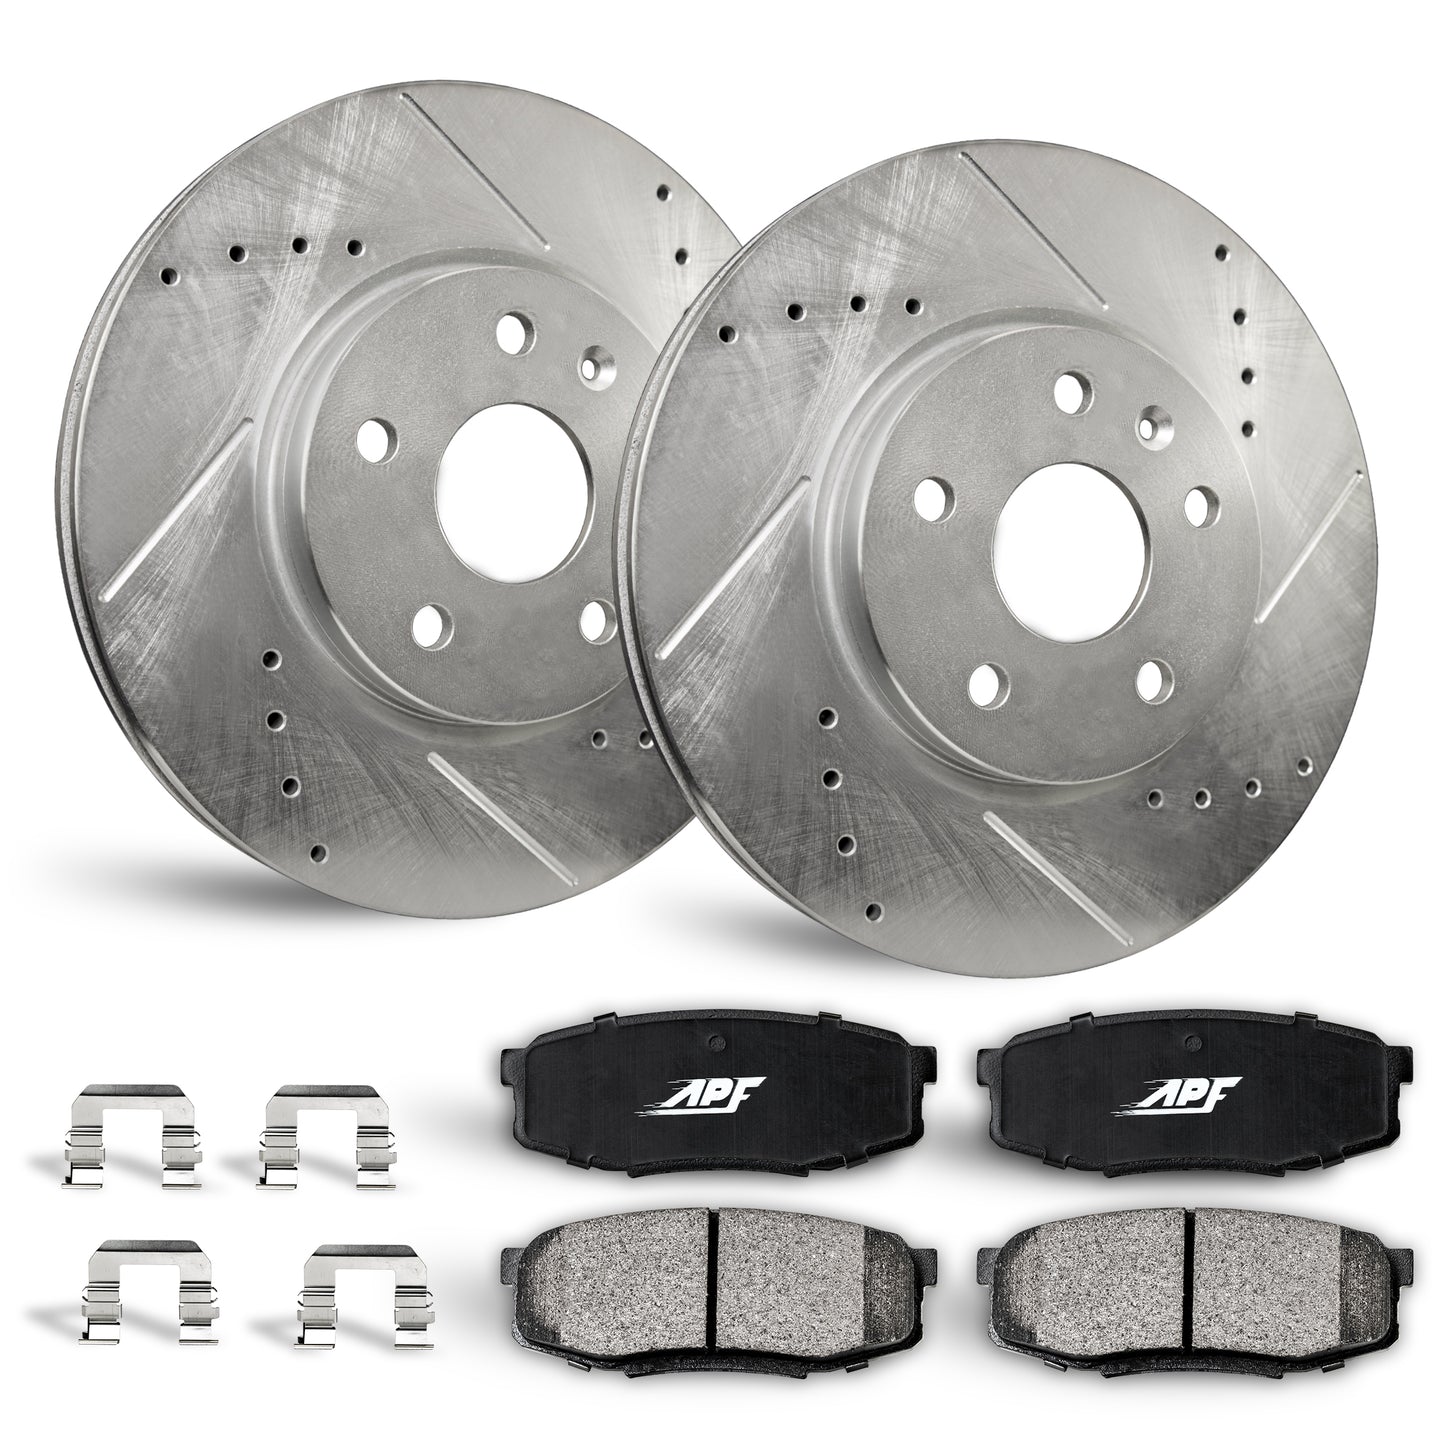 APF Rear Brake Kit compatible with Cadillac ELR 2014-2016 | Zinc Drilled Slotted Rotors with Ceramic Carbon Fiber Brake Pads